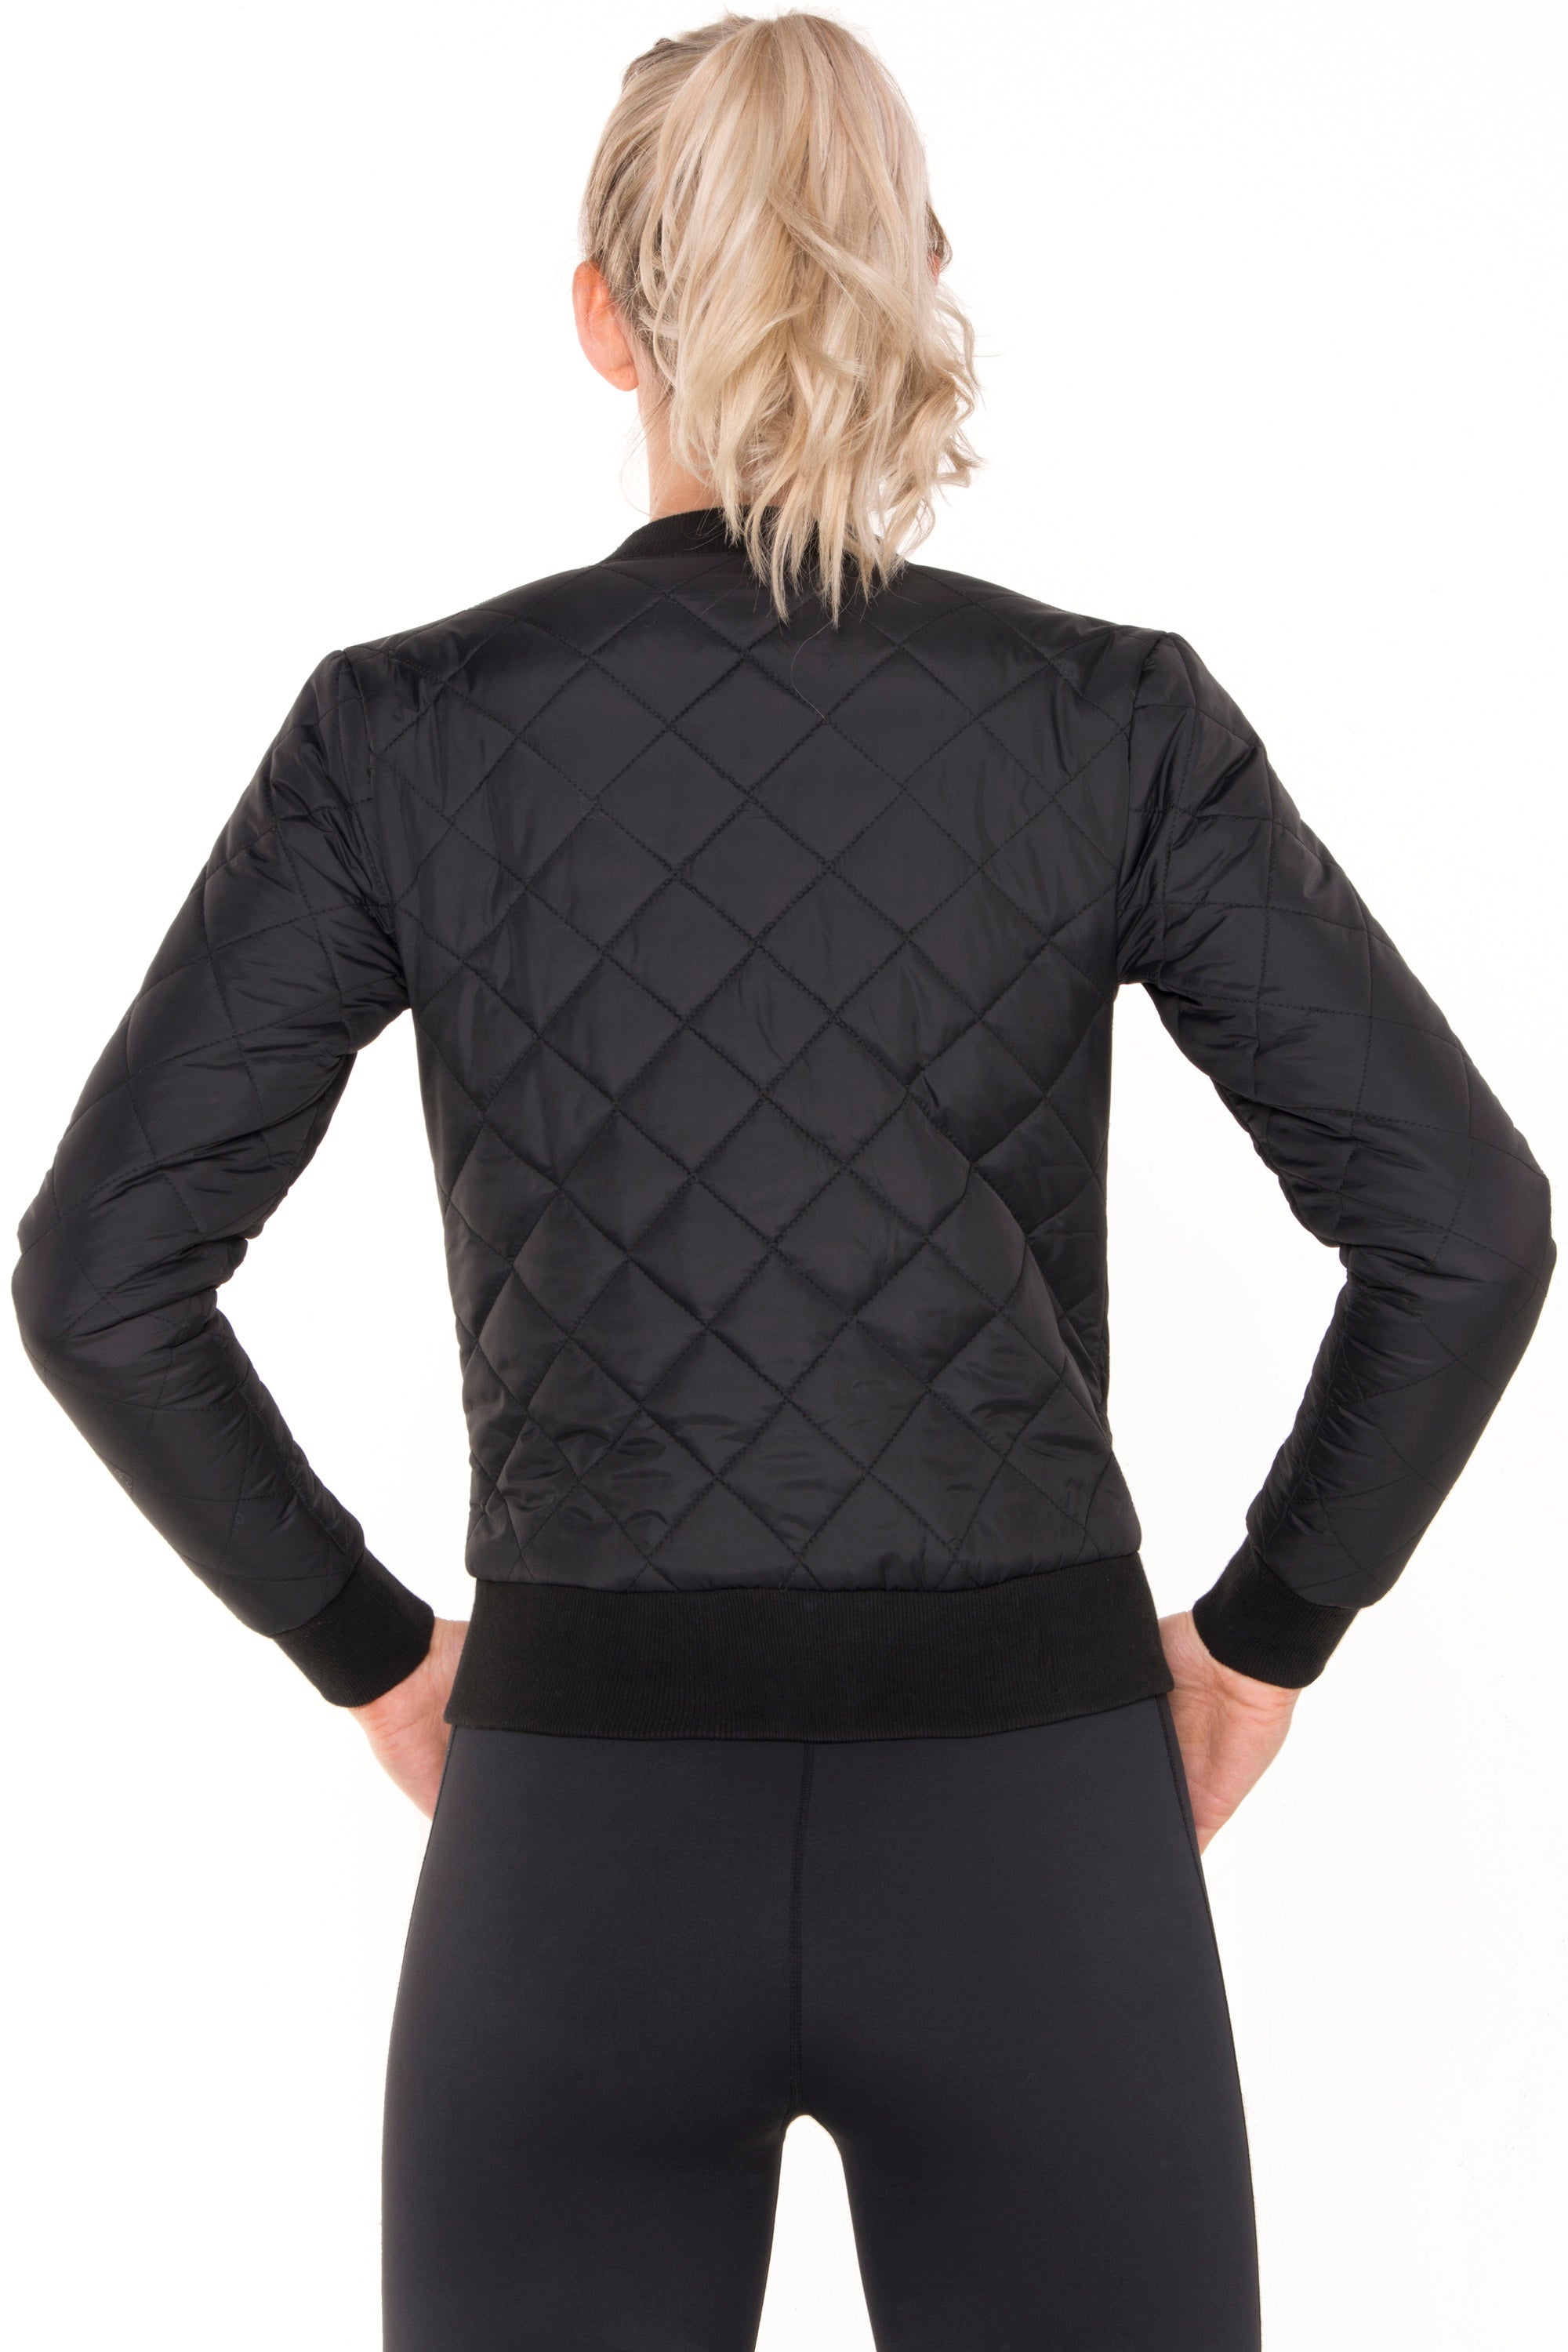 Download Tall Womens Quilted Black Bomber Jacket | Height-Of ...